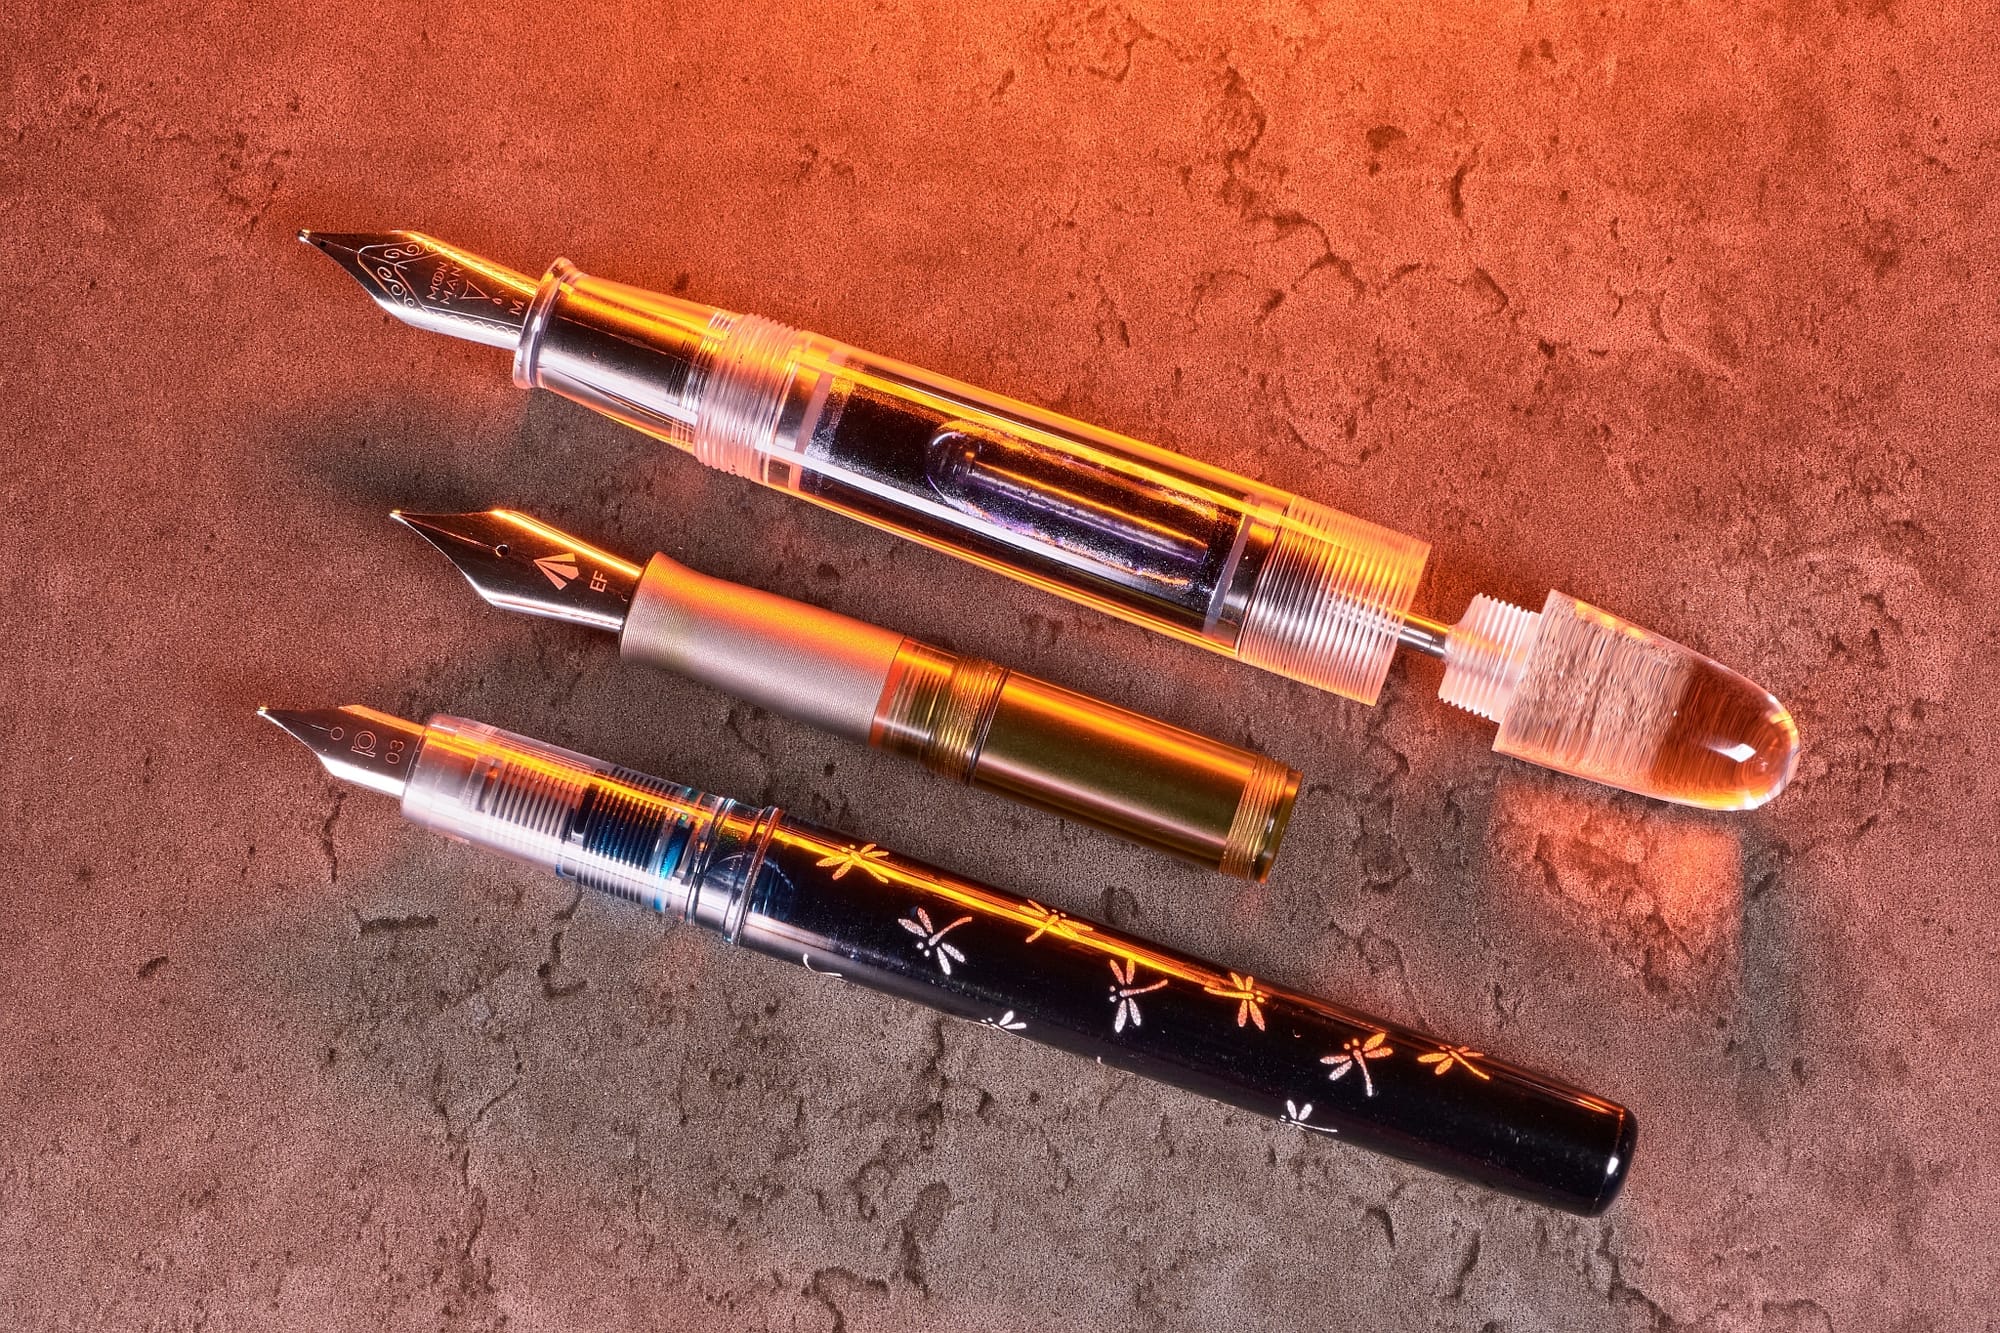 Photo of 3 different eyedropper fountain pens.